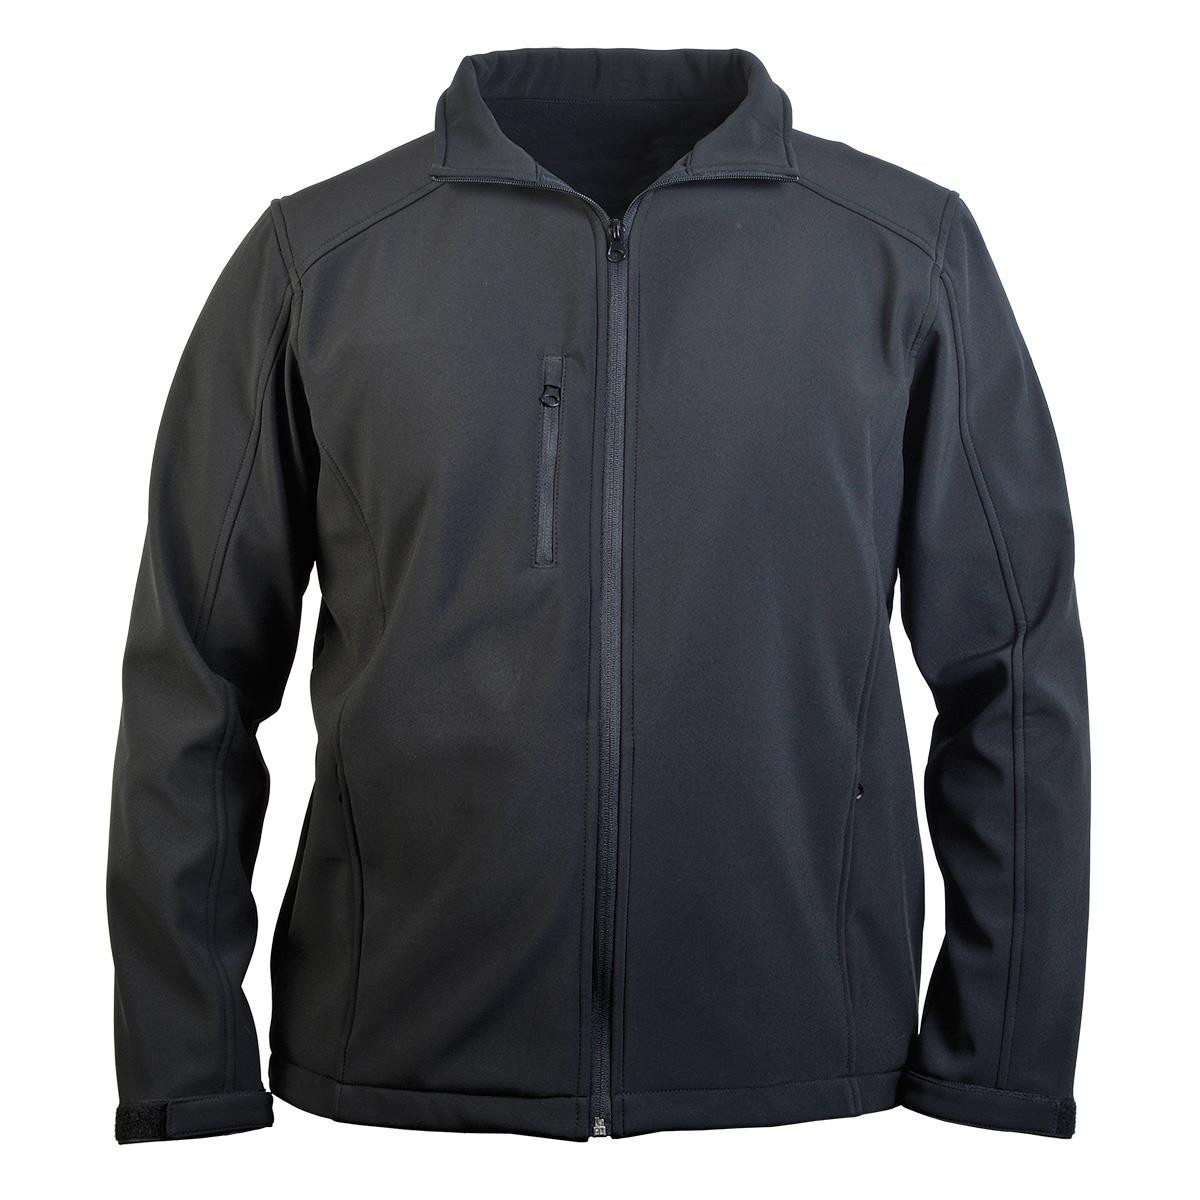 J800 The Softshell Jacket by Great Southern Clothing Company